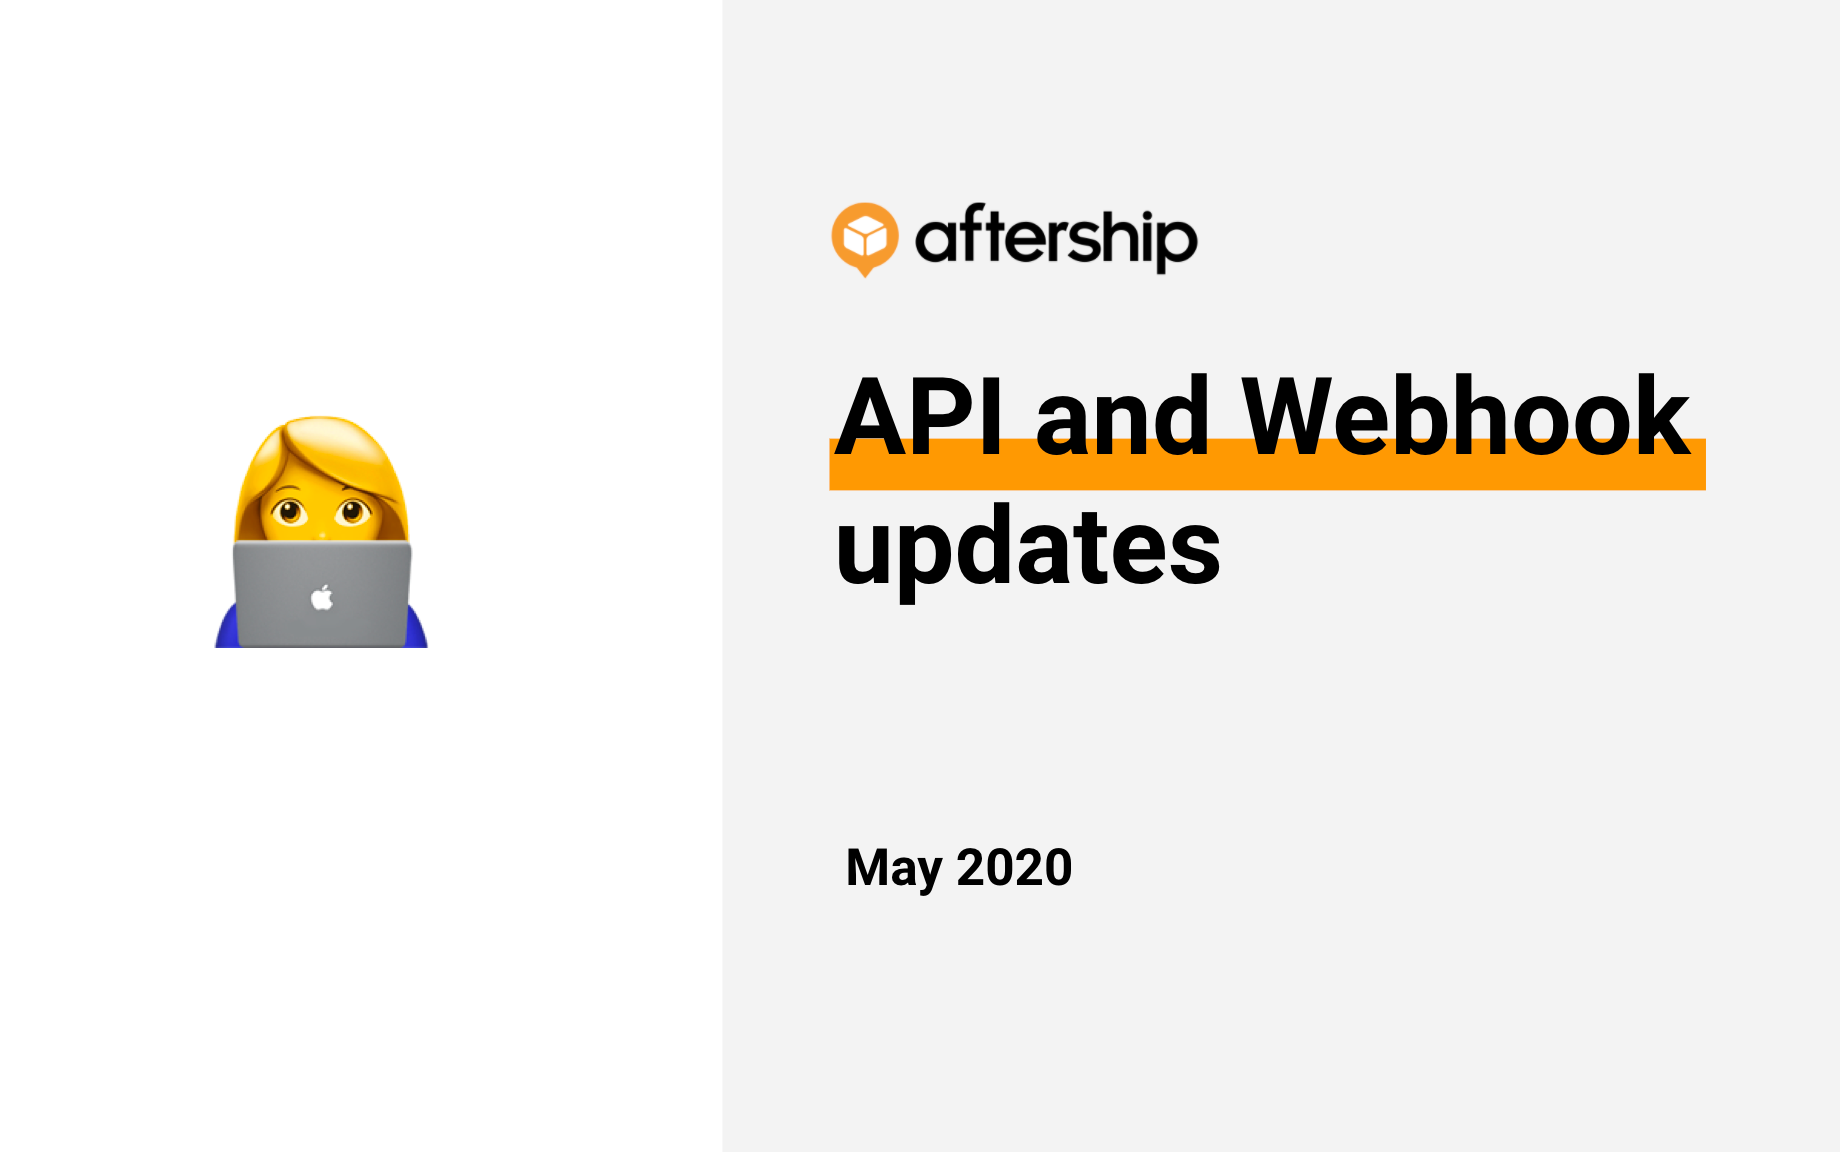 Updates to AfterShip API and Webhook (May 2020)